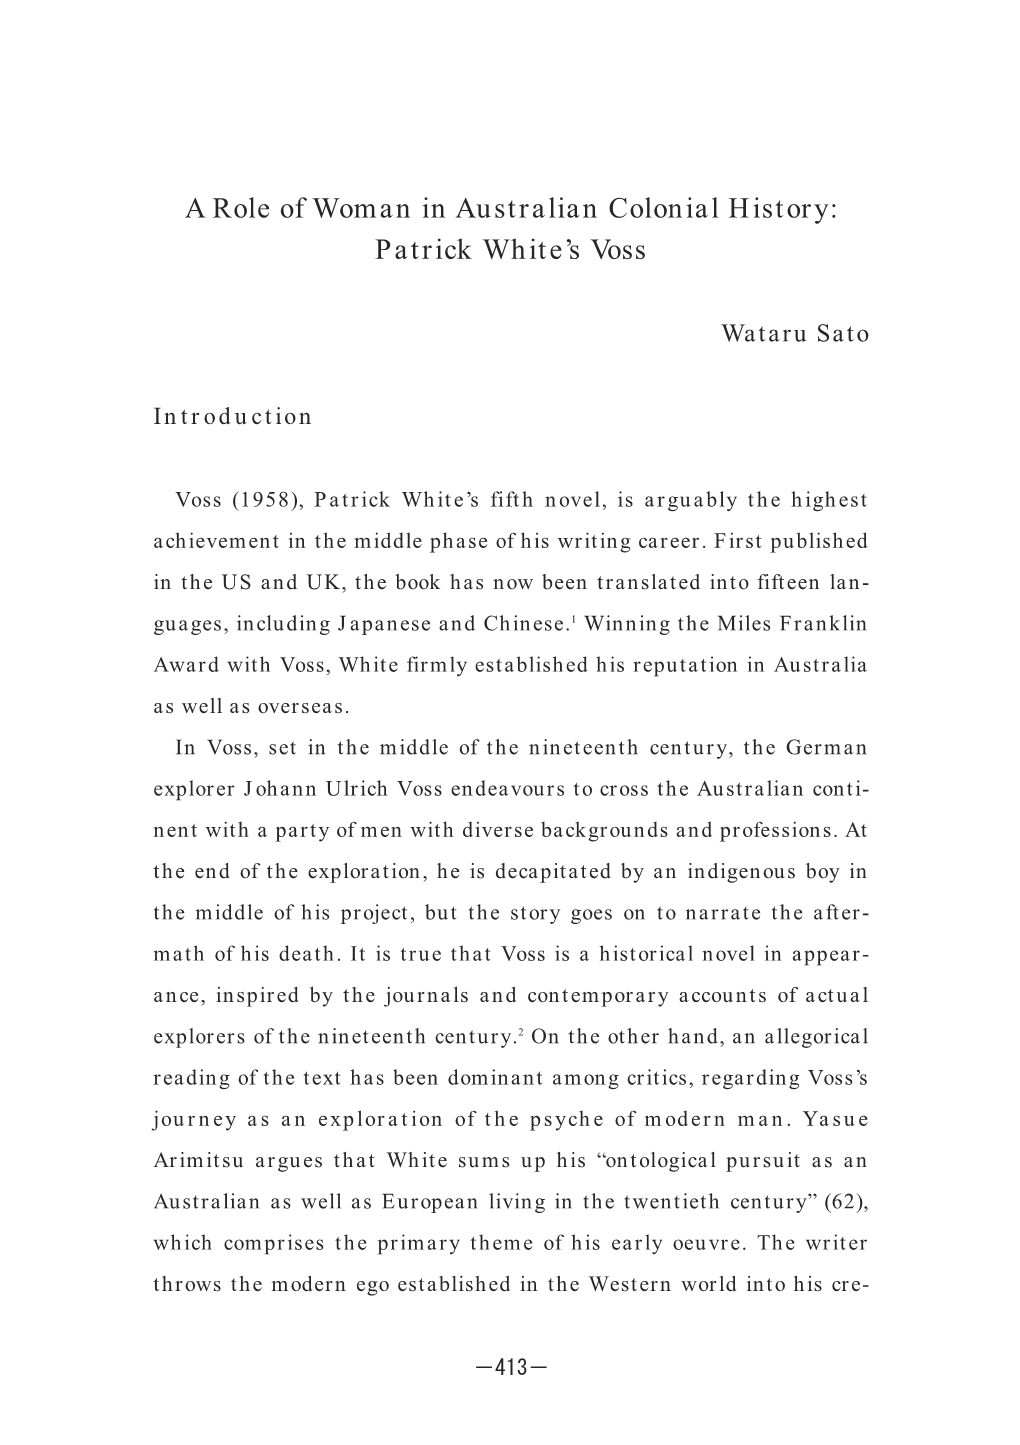 A Role of Woman in Australian Colonial History: Patrick White's Voss